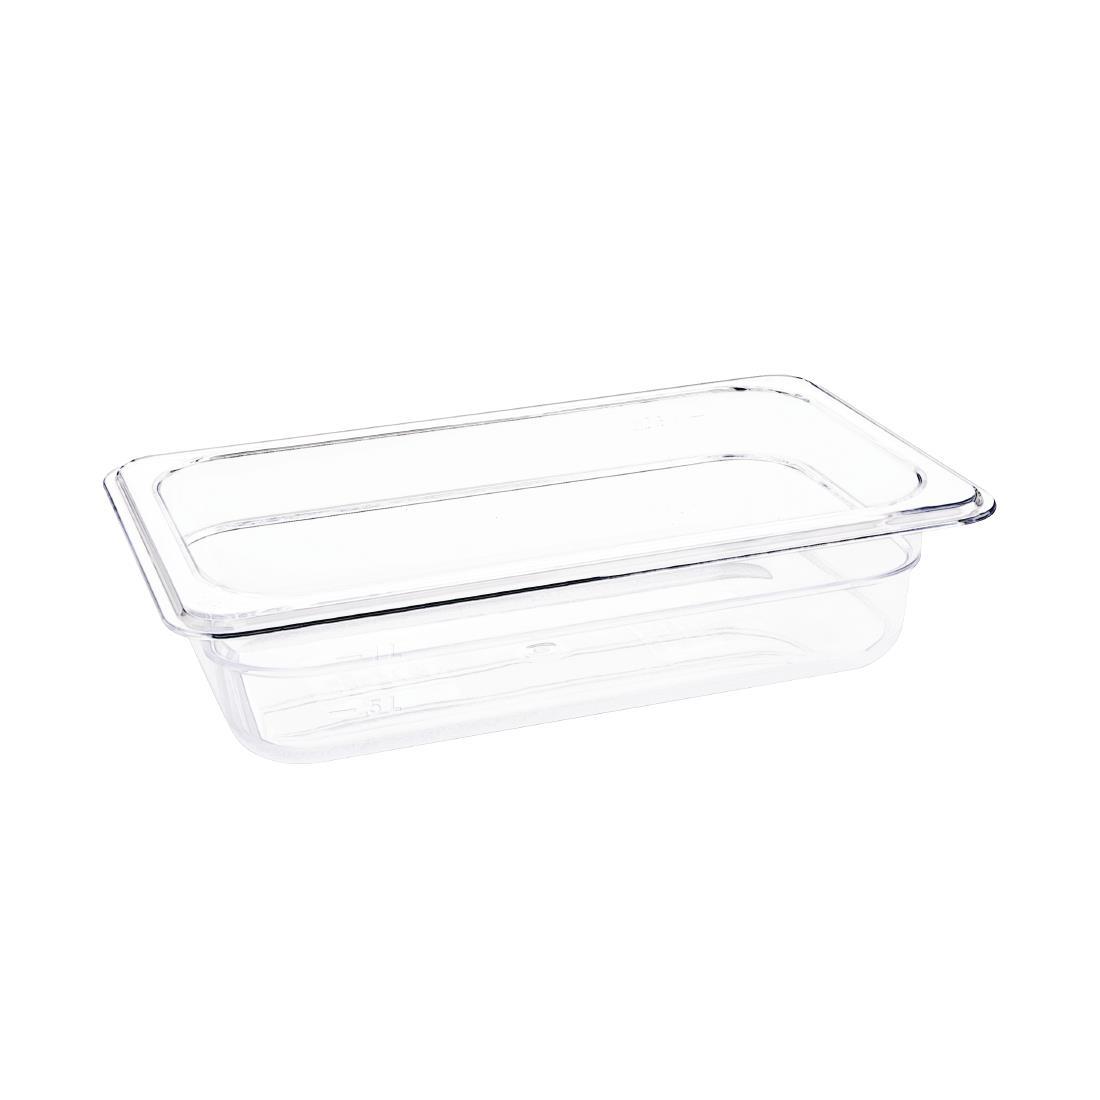 Vogue Polycarbonate 1/4 Gastronorm Container 65mm Clear - U236  - 1